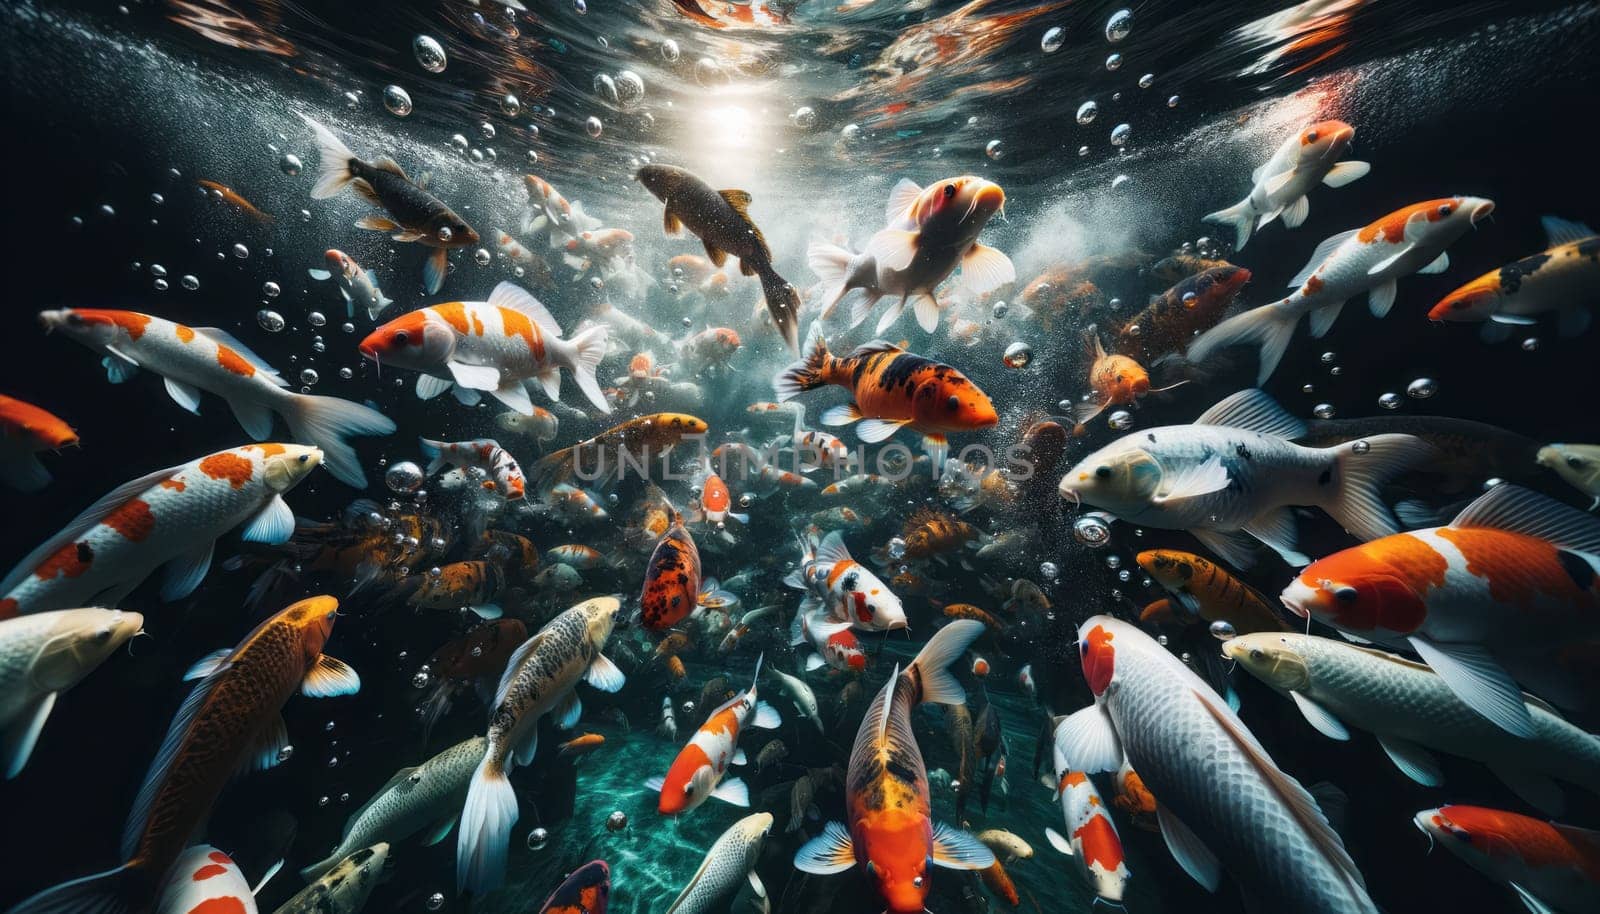 A wide-angle underwater photography capturing a group of koi fish swimming in a dark pond. The water is crystal clear, and bubbles are scattered throughout, reflecting light and adding to the liveliness of the scene. The koi fish display a variety of patterns, including white with orange spots, solid vibrant orange, and black with orange and white patches. Their fins and tails are elegantly spread, suggesting movement. The dark water background contrasts with the brightly colored fish, highlighting their details and the serene beauty of the aquatic environment.